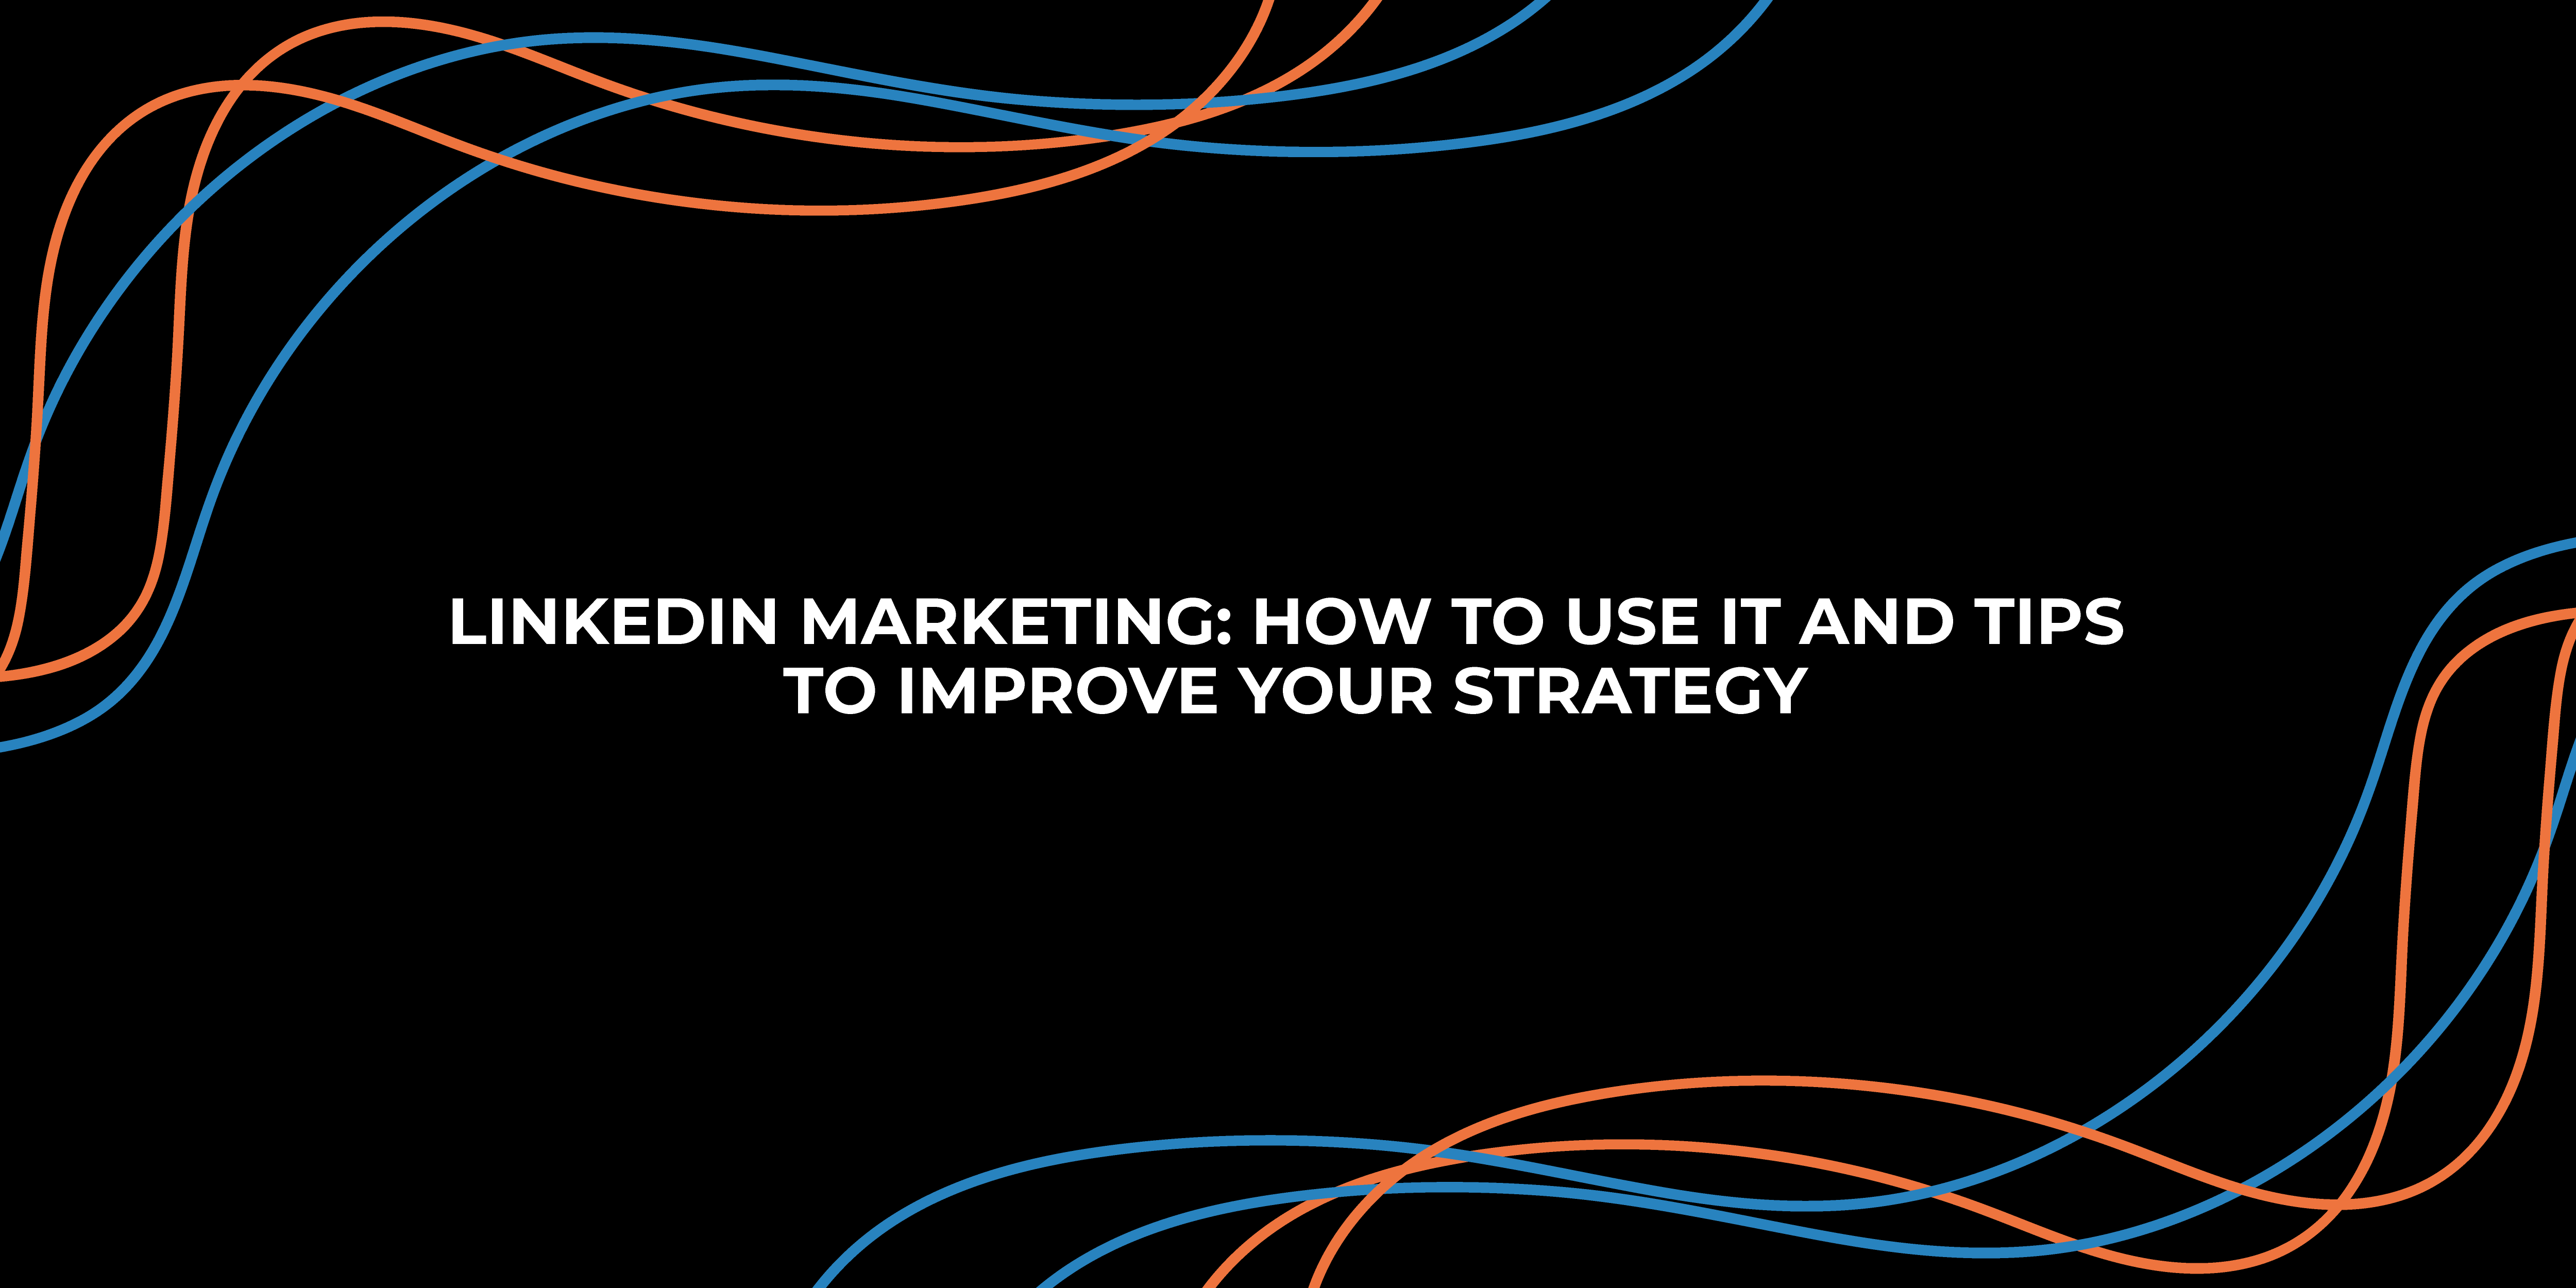 LINKEDIN MARKETING: HOW TO USE IT AND TIPS TO IMPROVE YOUR STRATEGY